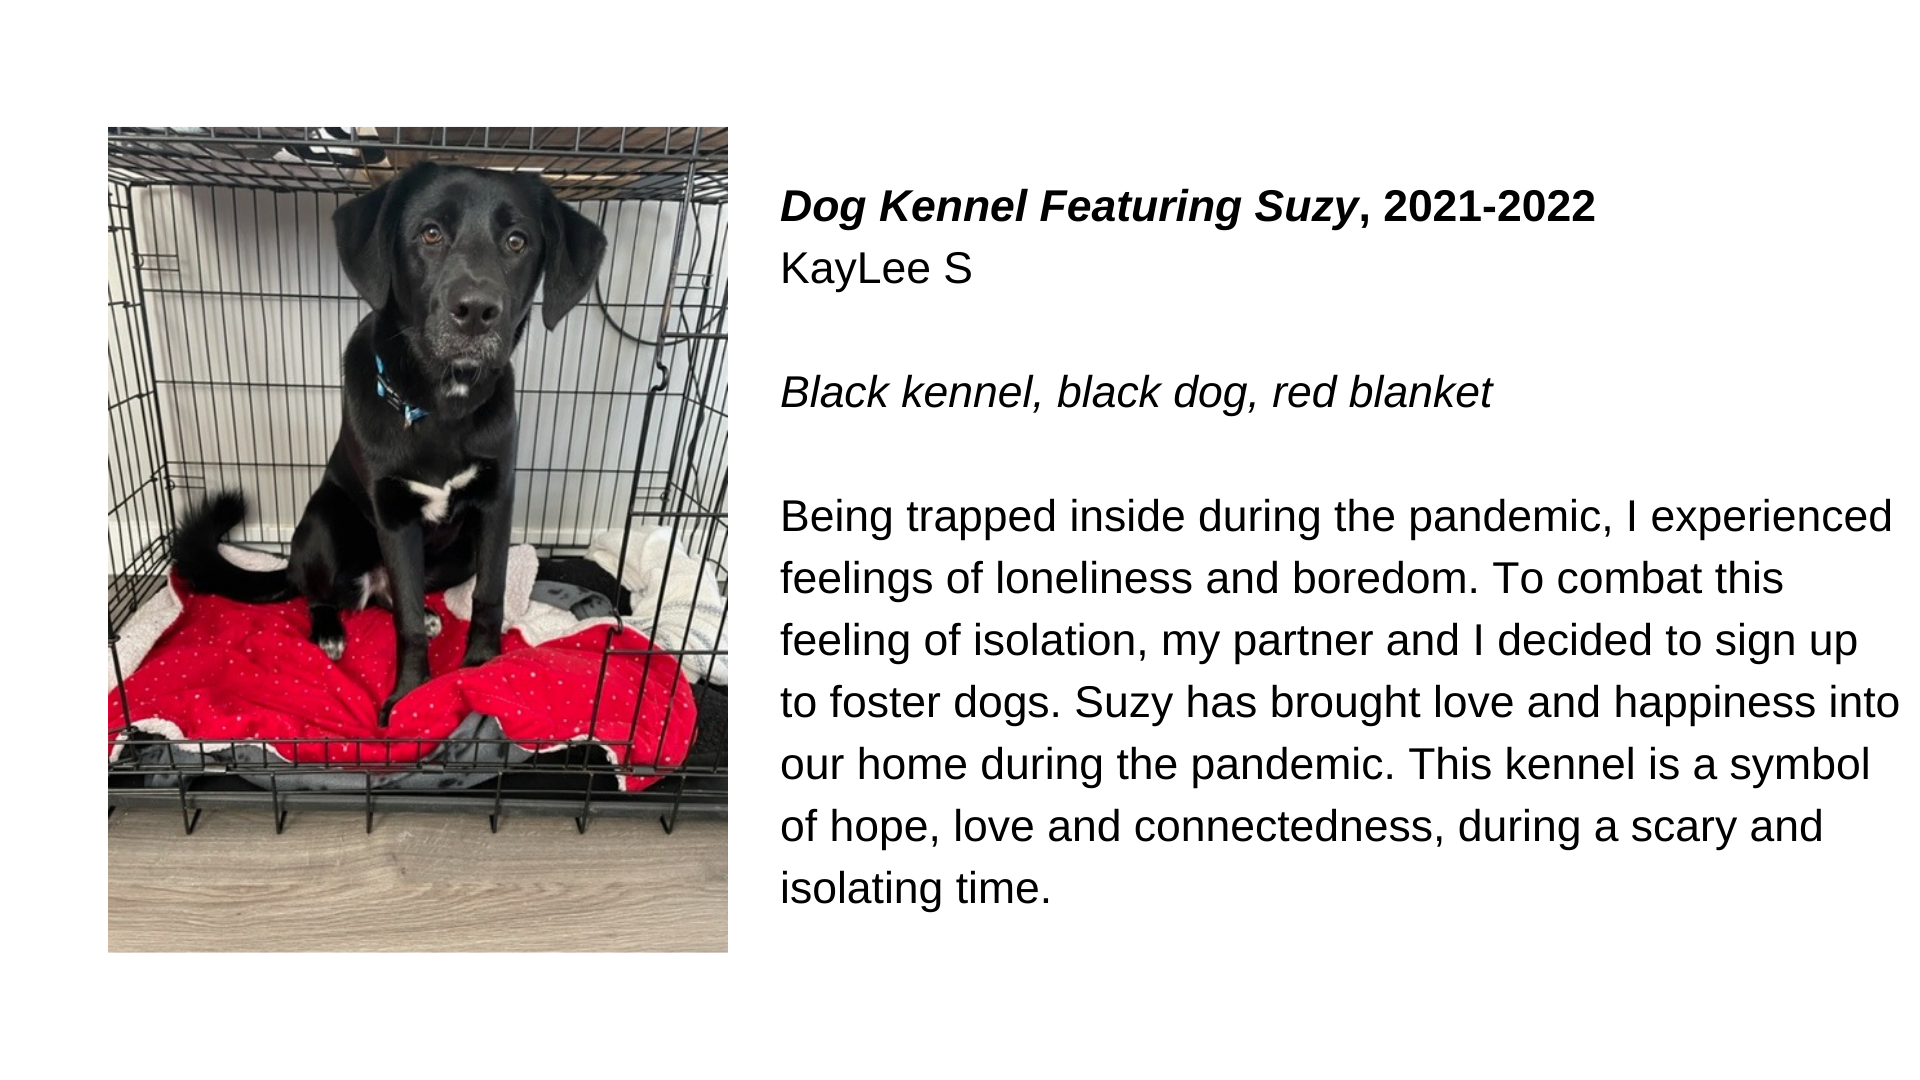  A black dog sitting on a red blanket in a kennel. Next to it, the text “Dog Kennel Featuring Suzy, 2021-22 - KayLee S. Black kennel, black dog, red blanket. Being trapped inside during the pandemic, I experienced feelings of loneliness and boredom. 